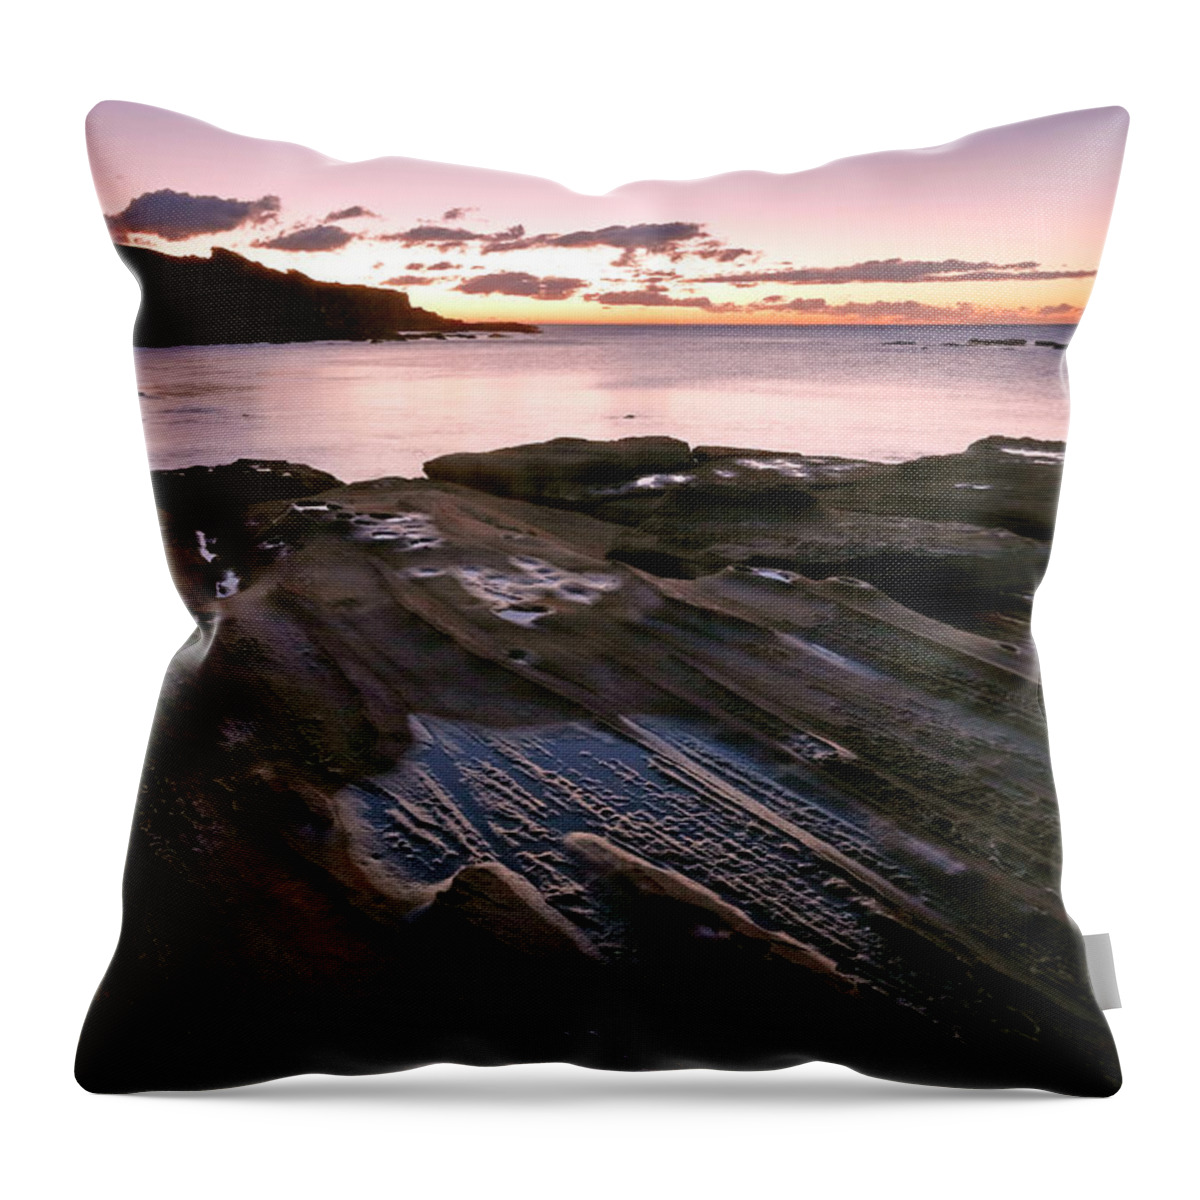 Little Throw Pillow featuring the photograph Little Bay Dawn by Nicholas Blackwell